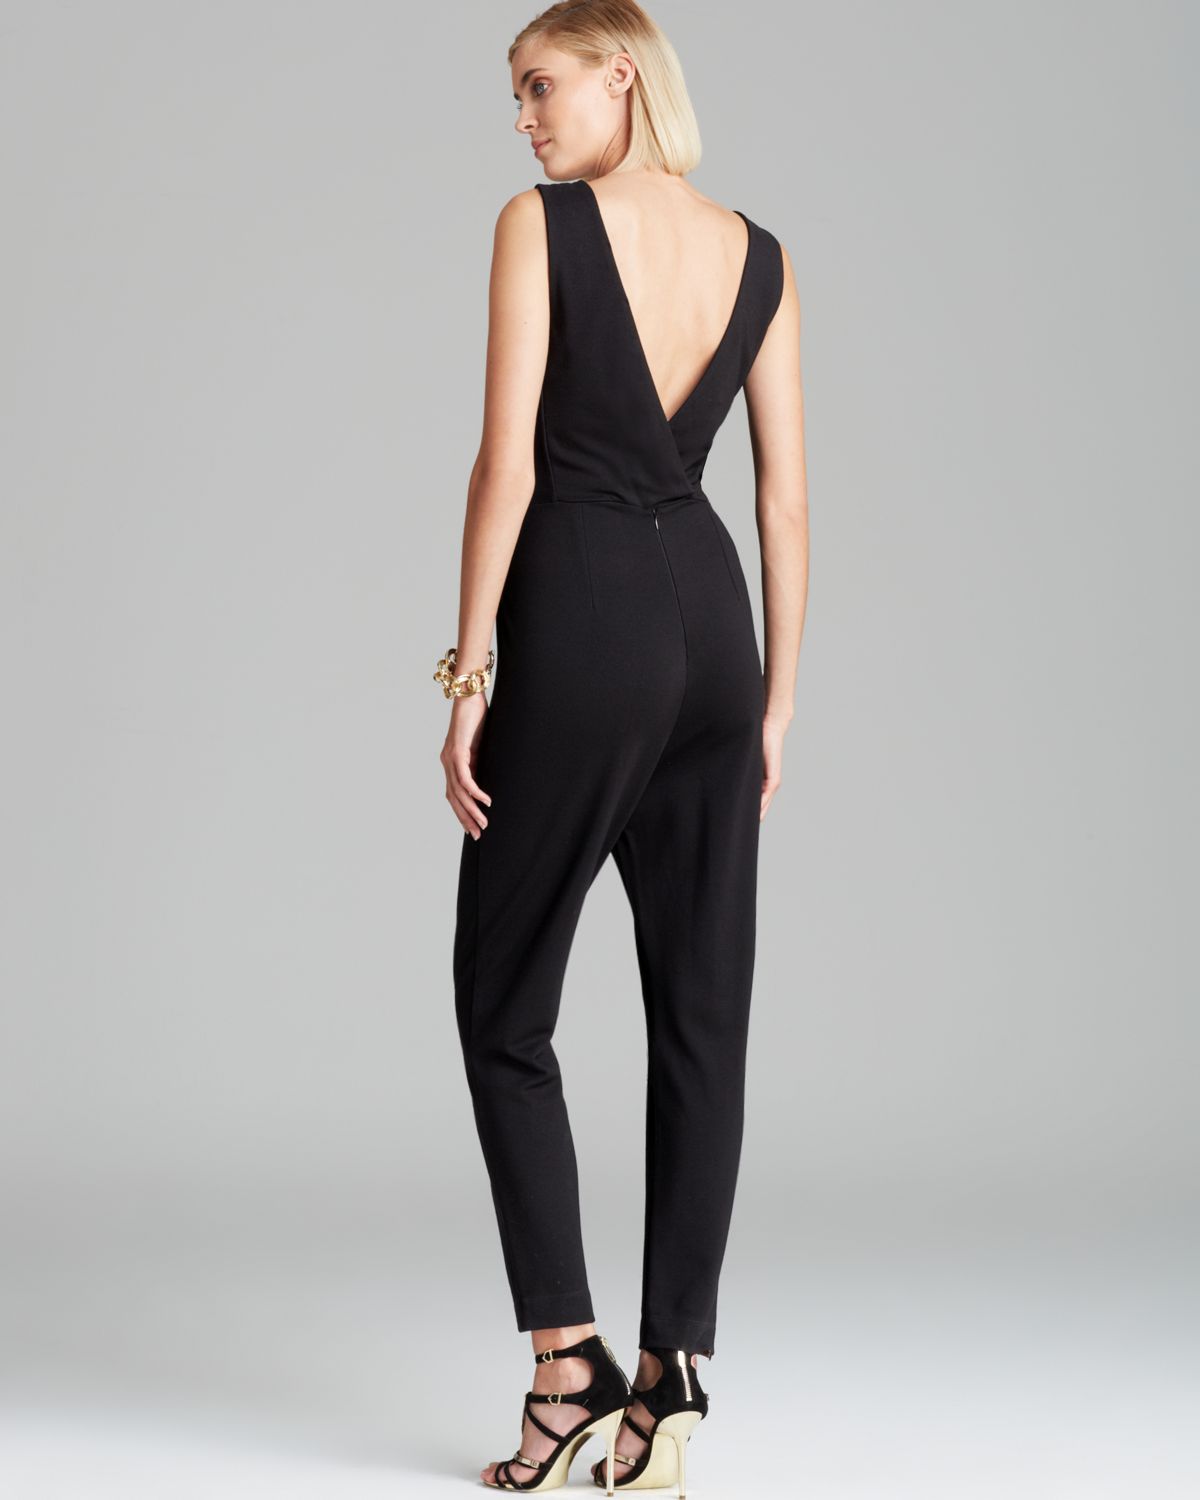 Lyst - French Connection Marie Jumpsuit in Black